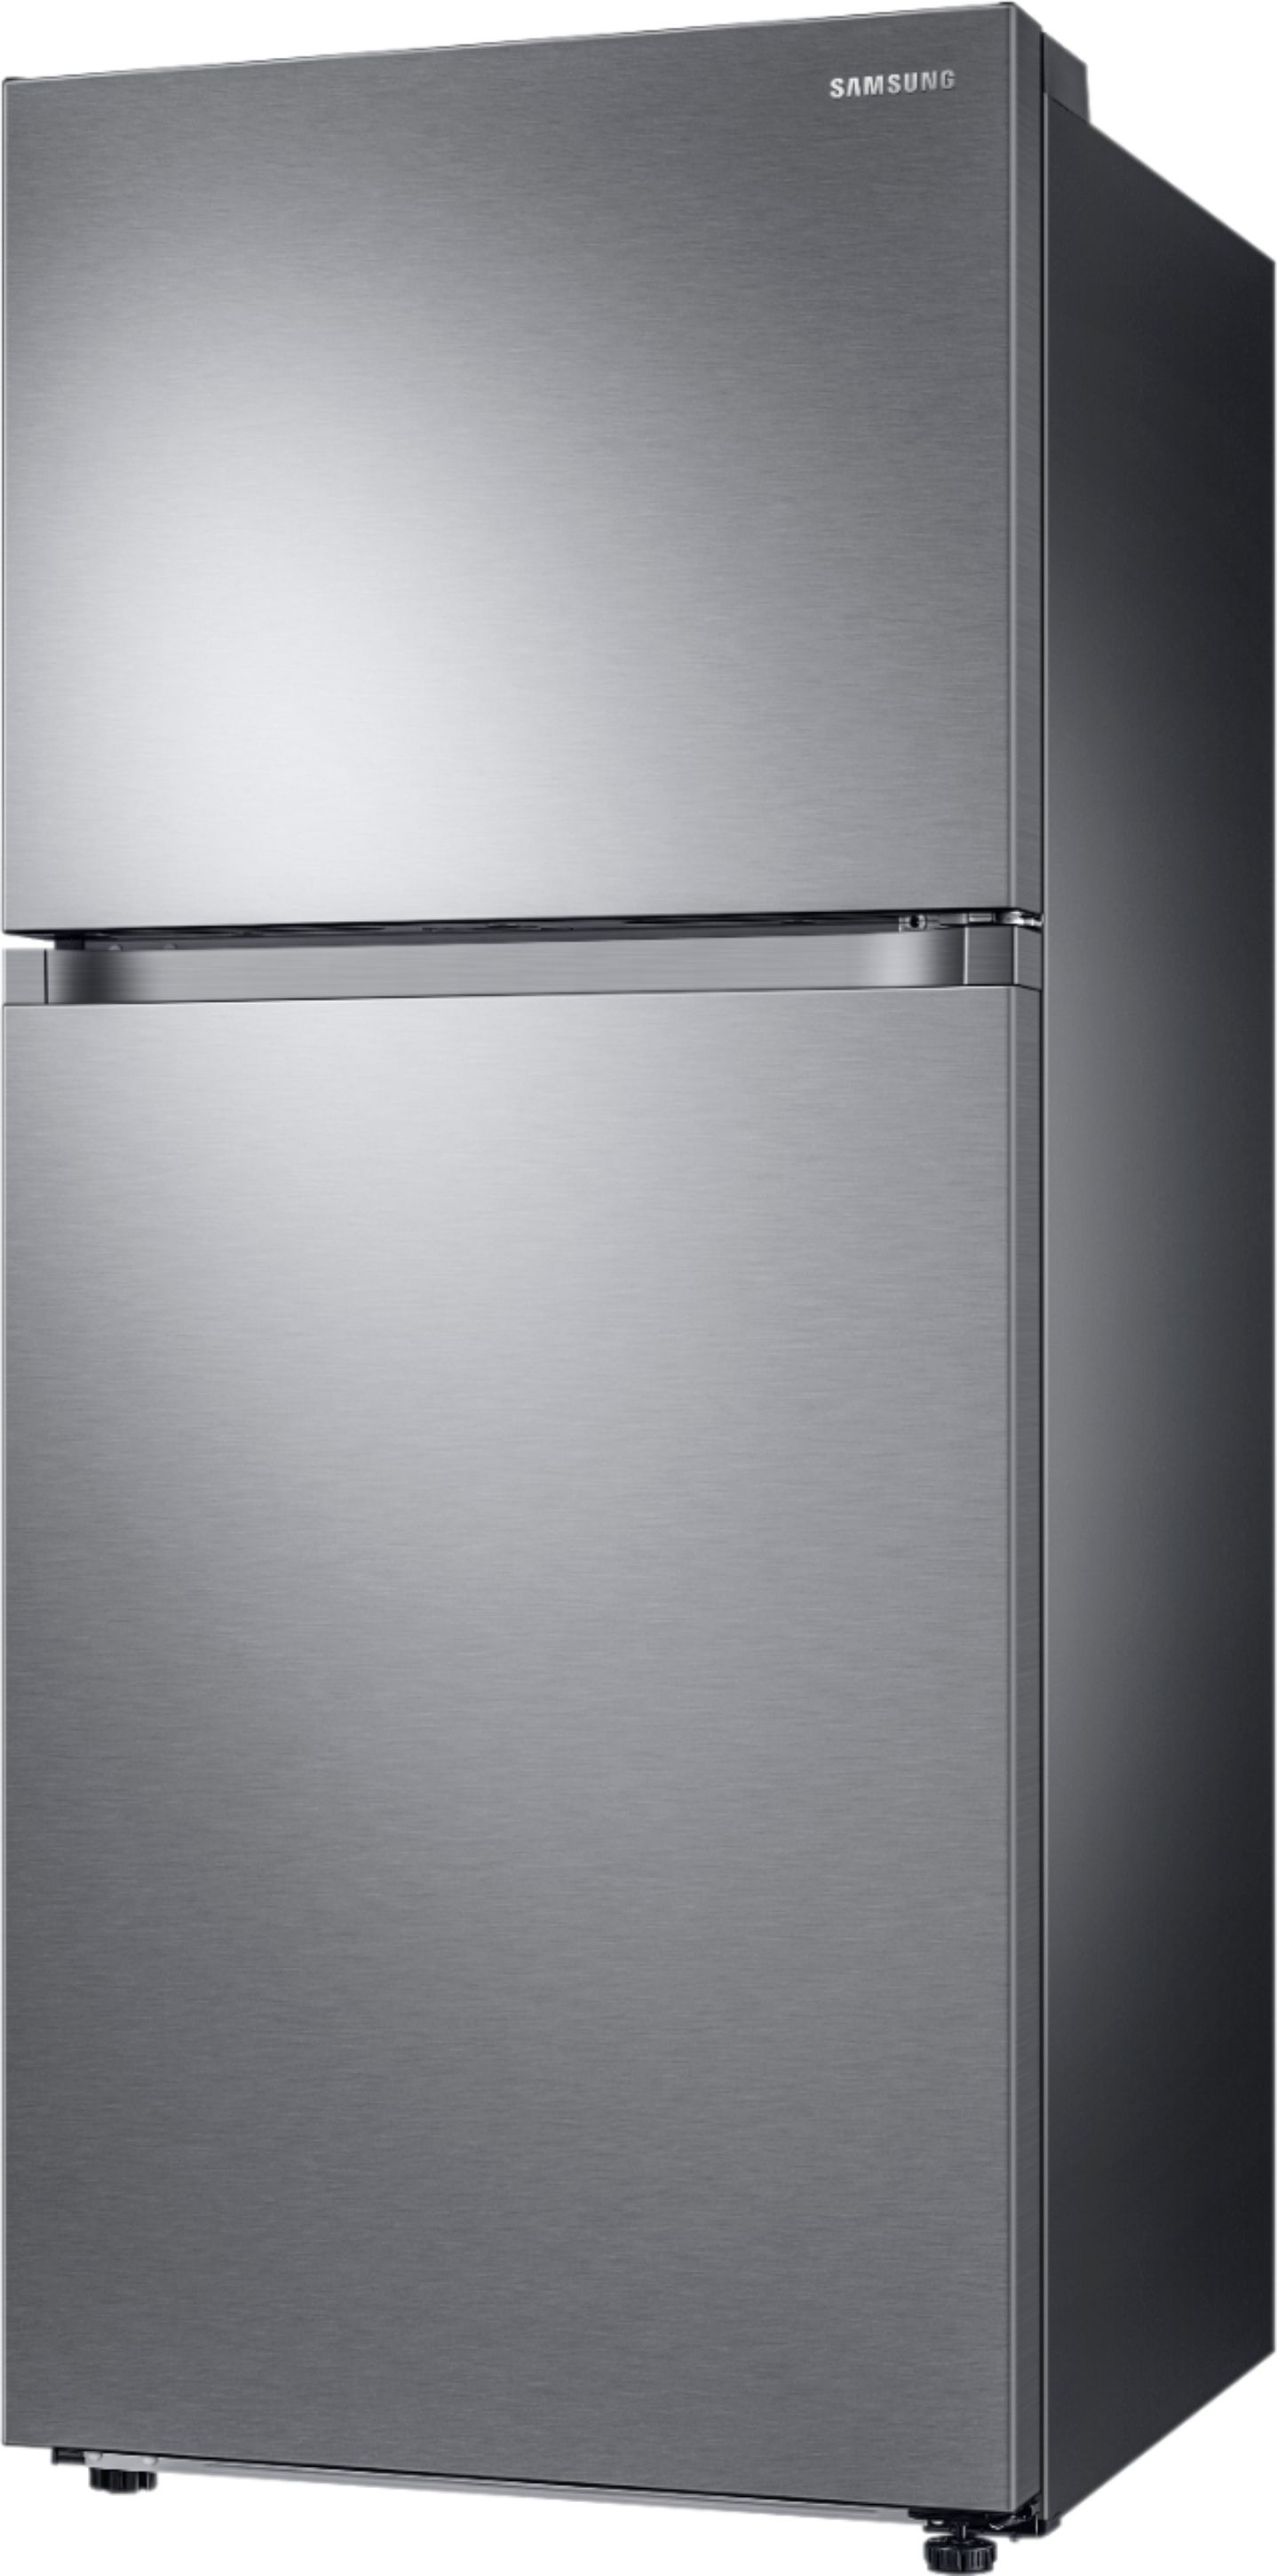 Left View: Samsung - 17.6 cu. ft. Top-Freezer Refrigerator with FlexZone - Stainless Steel